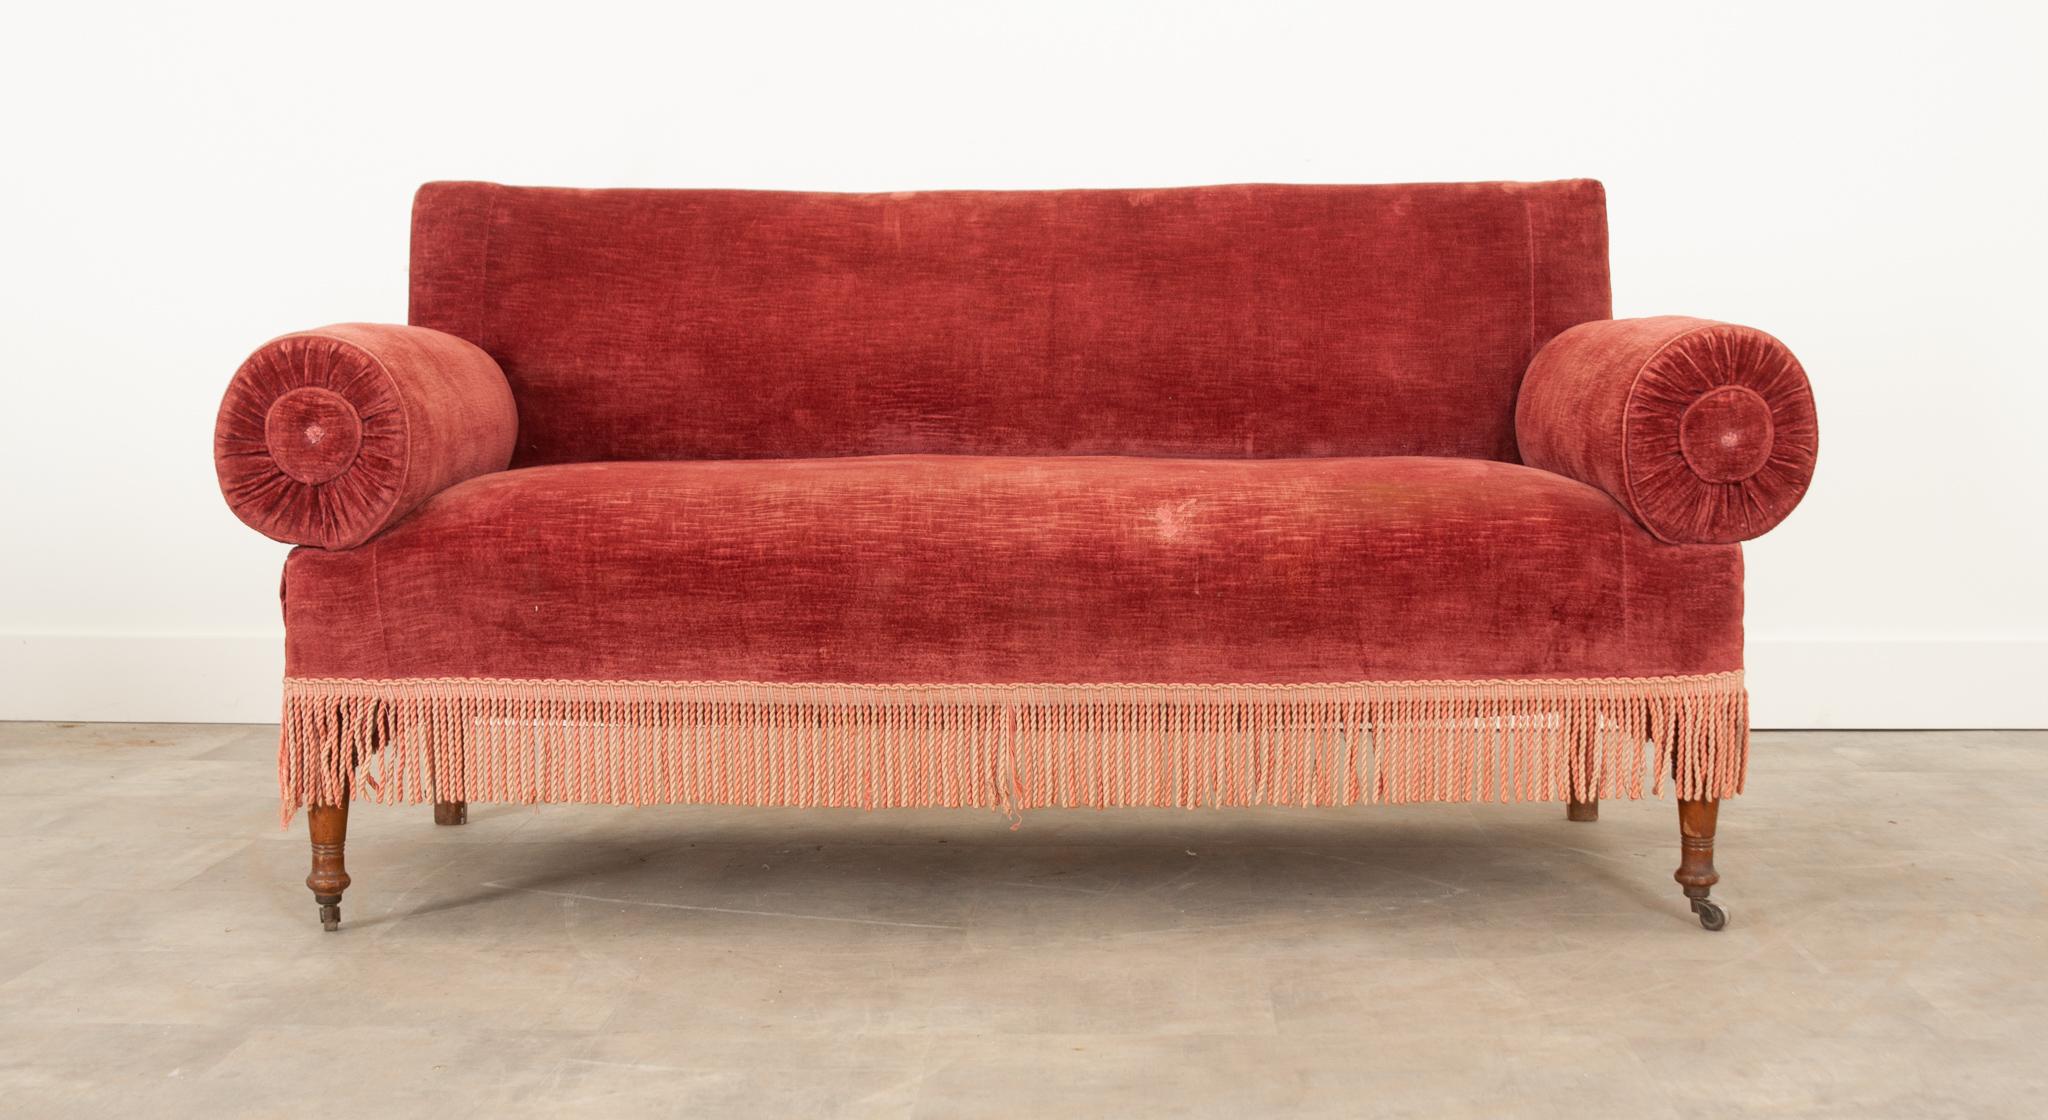 Add a unique pop of color and texture to your interior with this fabulous settee. In wonderful antique condition, the sturdy frame is upholstered in a soft red velvet with a twisted fringe trim. This is an incredibly versatile piece. The arms have